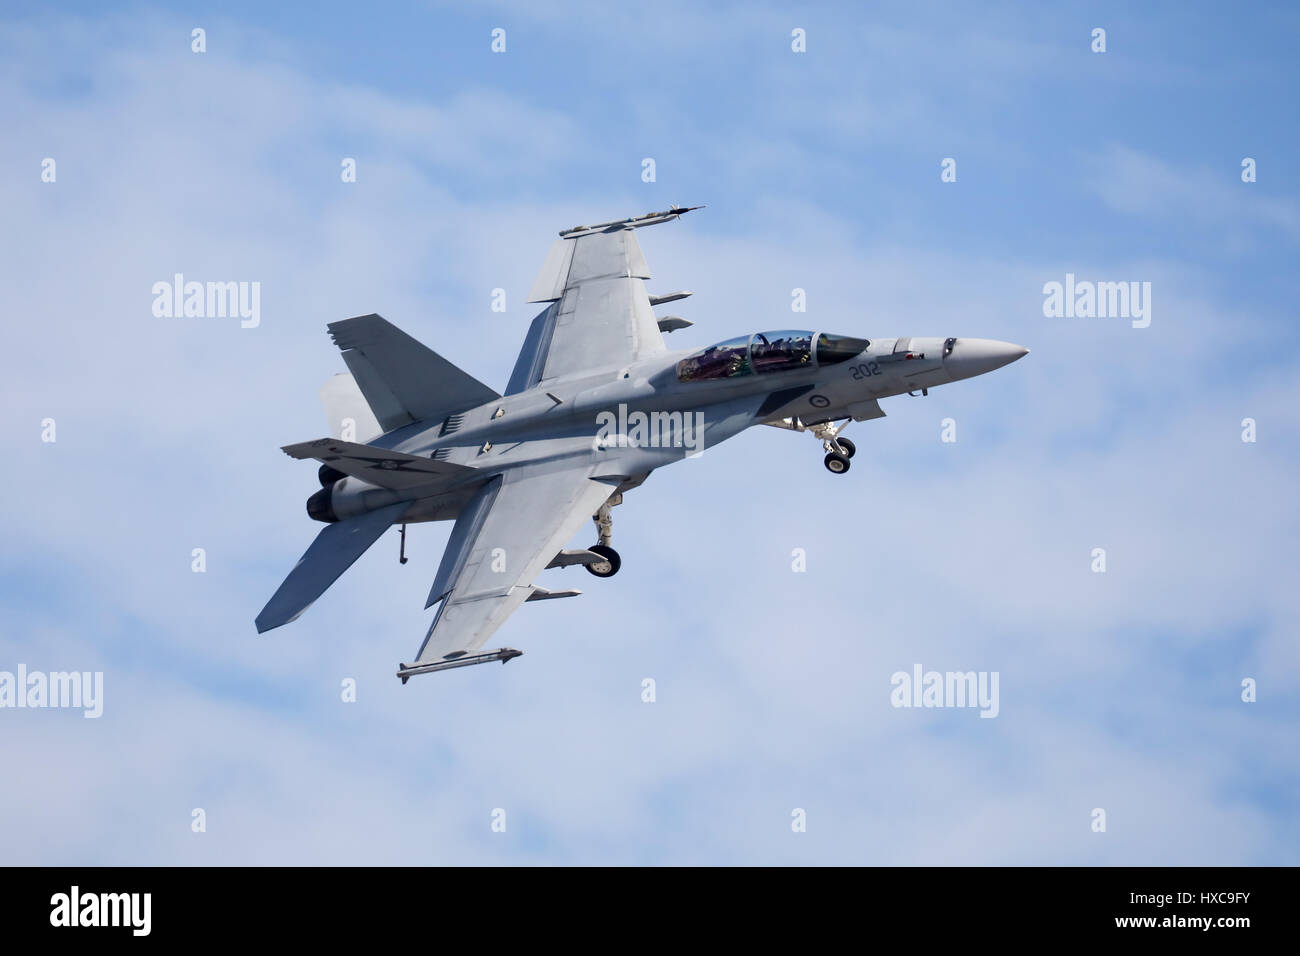 MELBOURNE, AUSTRALIA - MARCH 26: An Royal Australian Air Force FA18F Super Hornet performs in a public display above Melbourne on March 26, 2017 Stock Photo